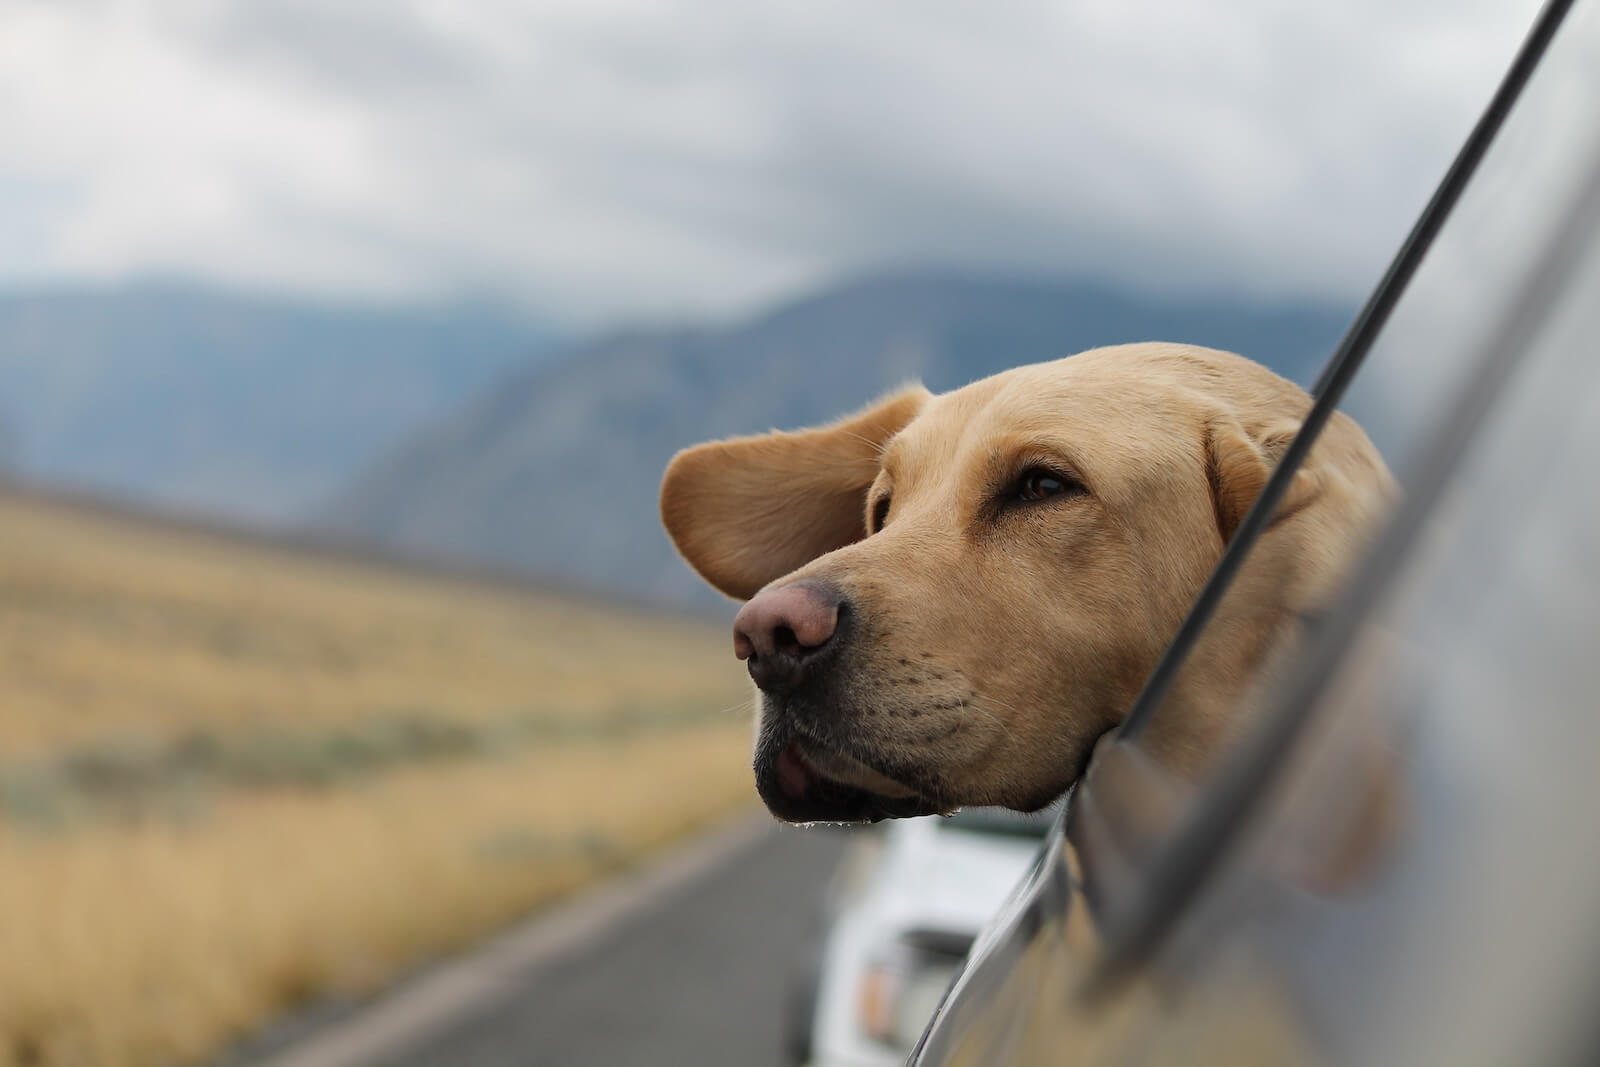 Best Dog Breeds For Travel: Top 5 Adventure Buddies Most Recommended By Pet Experts